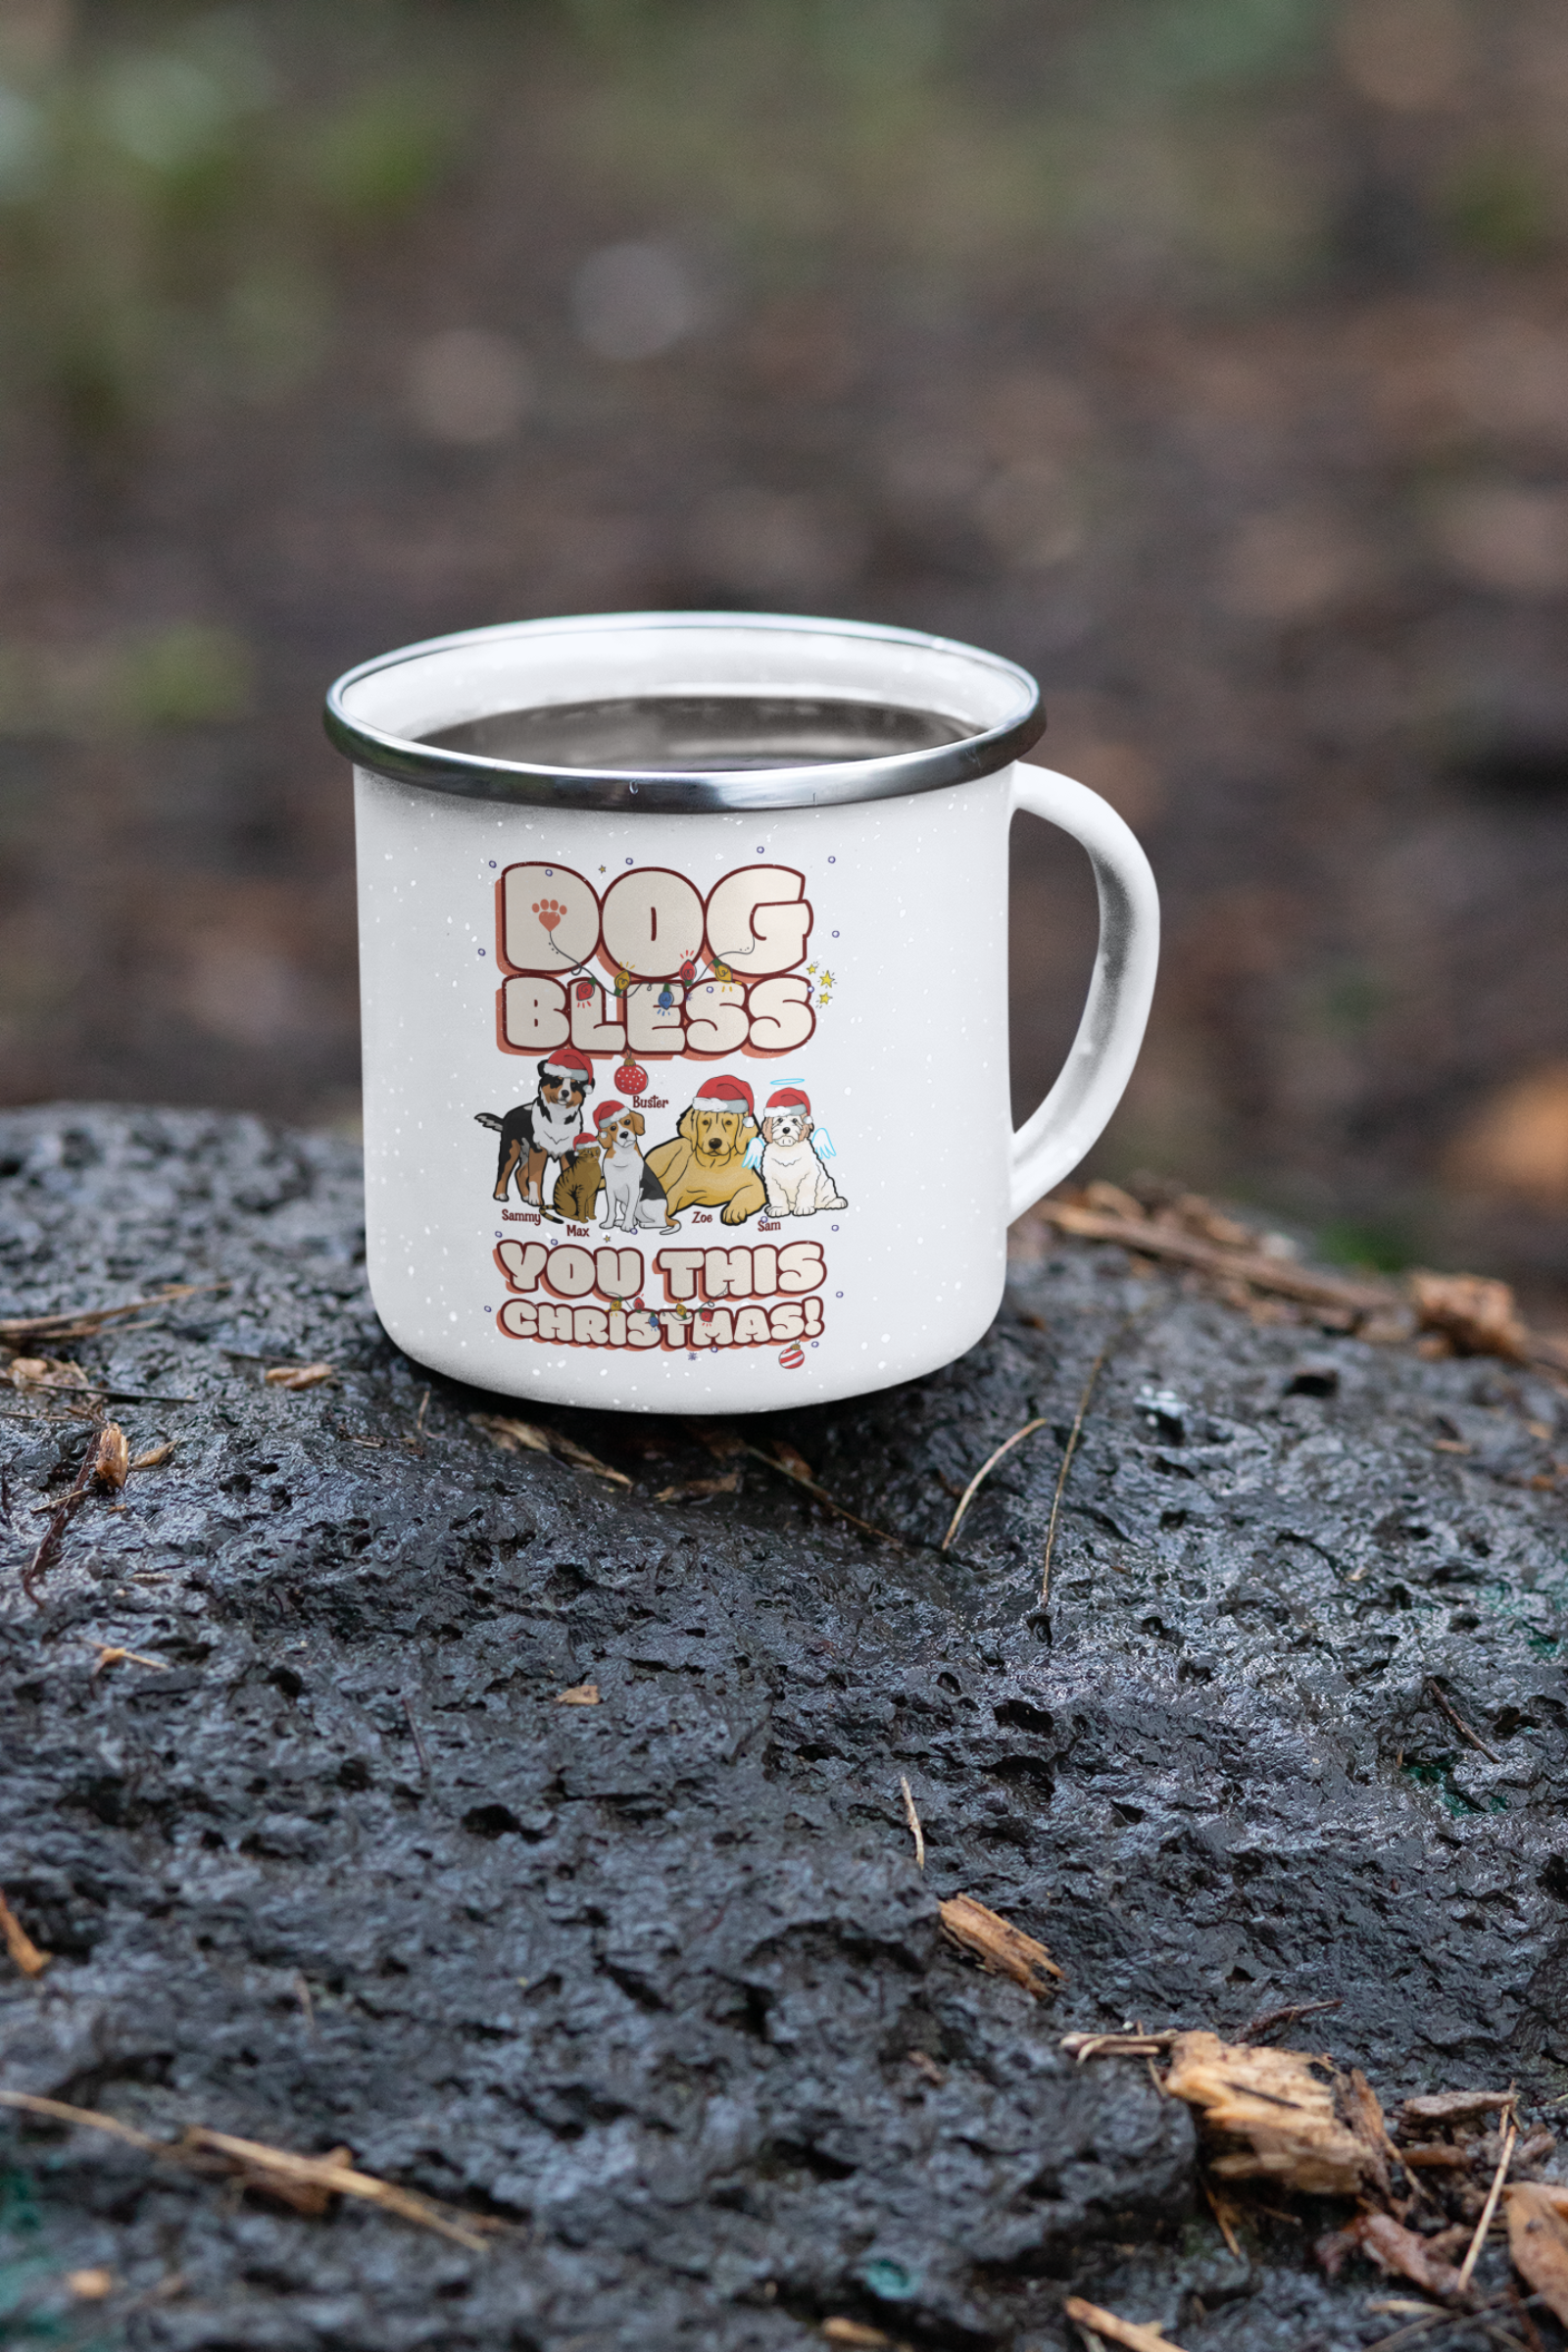 Dog Bless You This Christmas Customized Enamel Mug for Dogs Lover